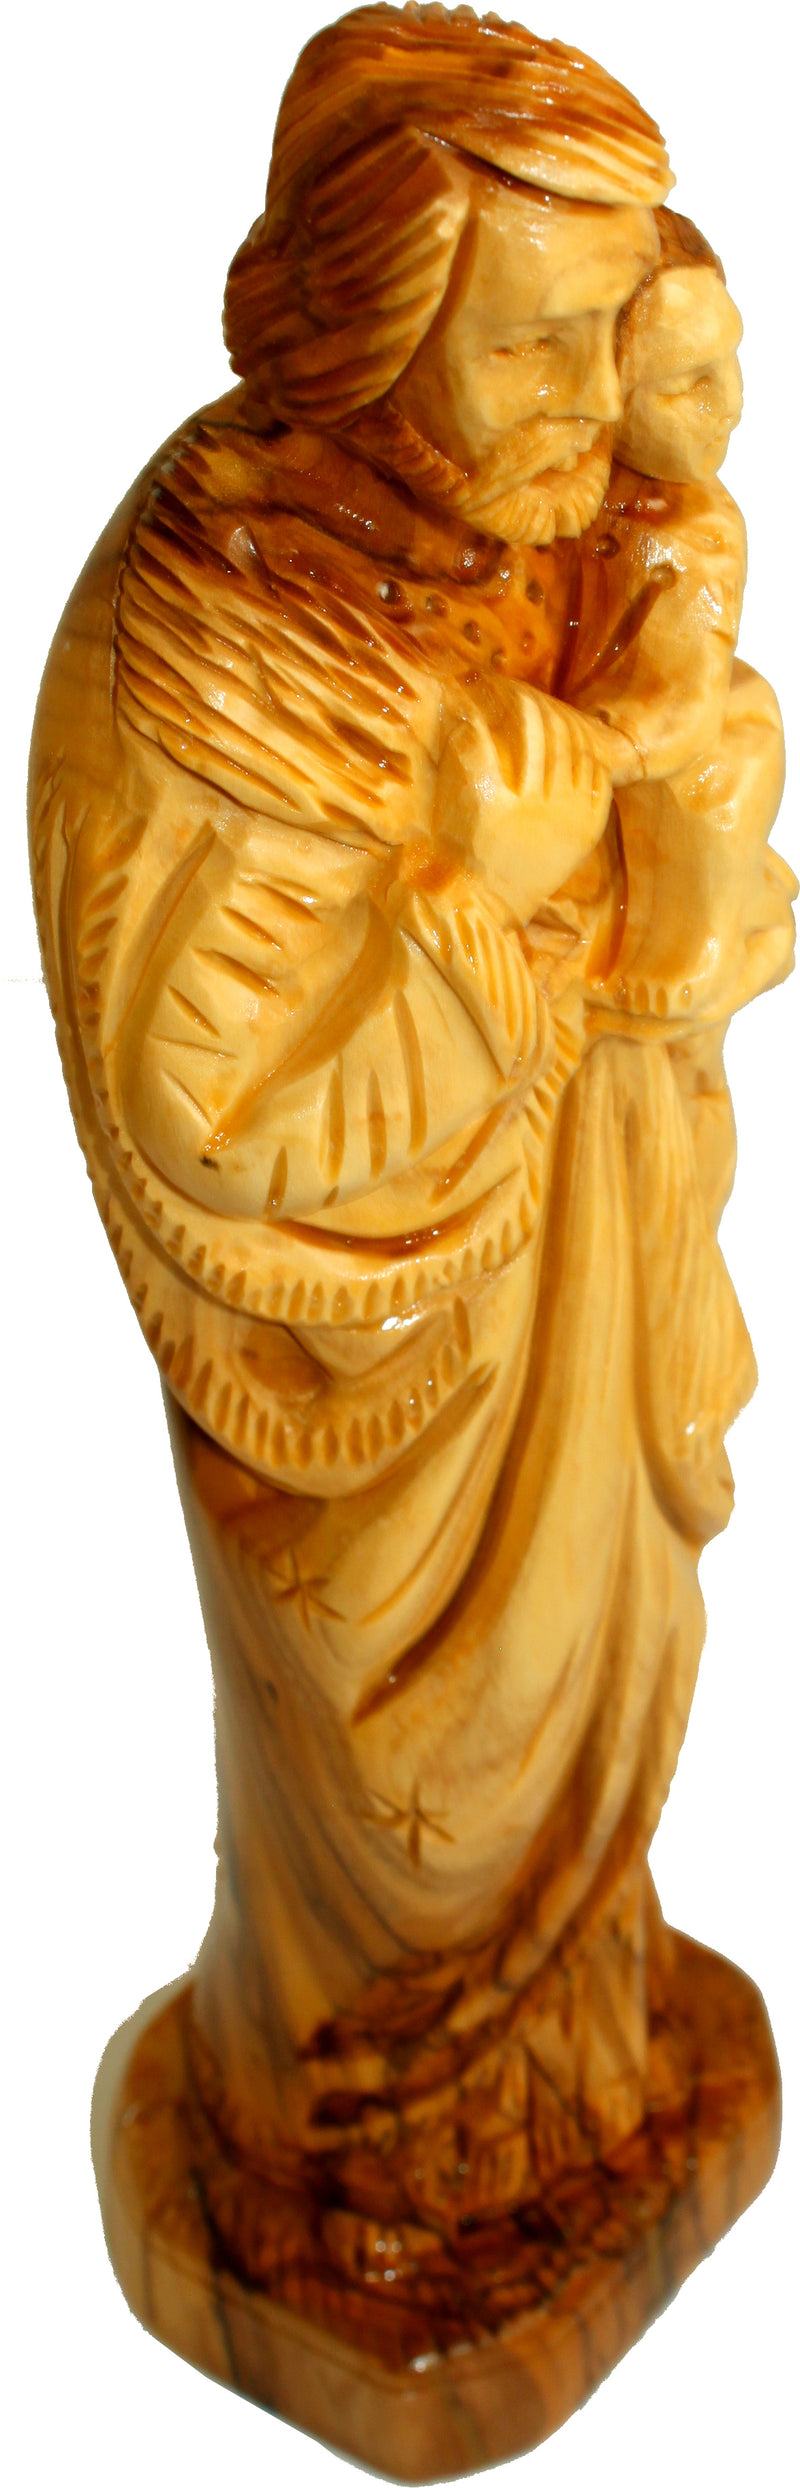 St. Joseph - Grade A Olive wood hand carved figure from Bethlehem (10.75 inches tall)